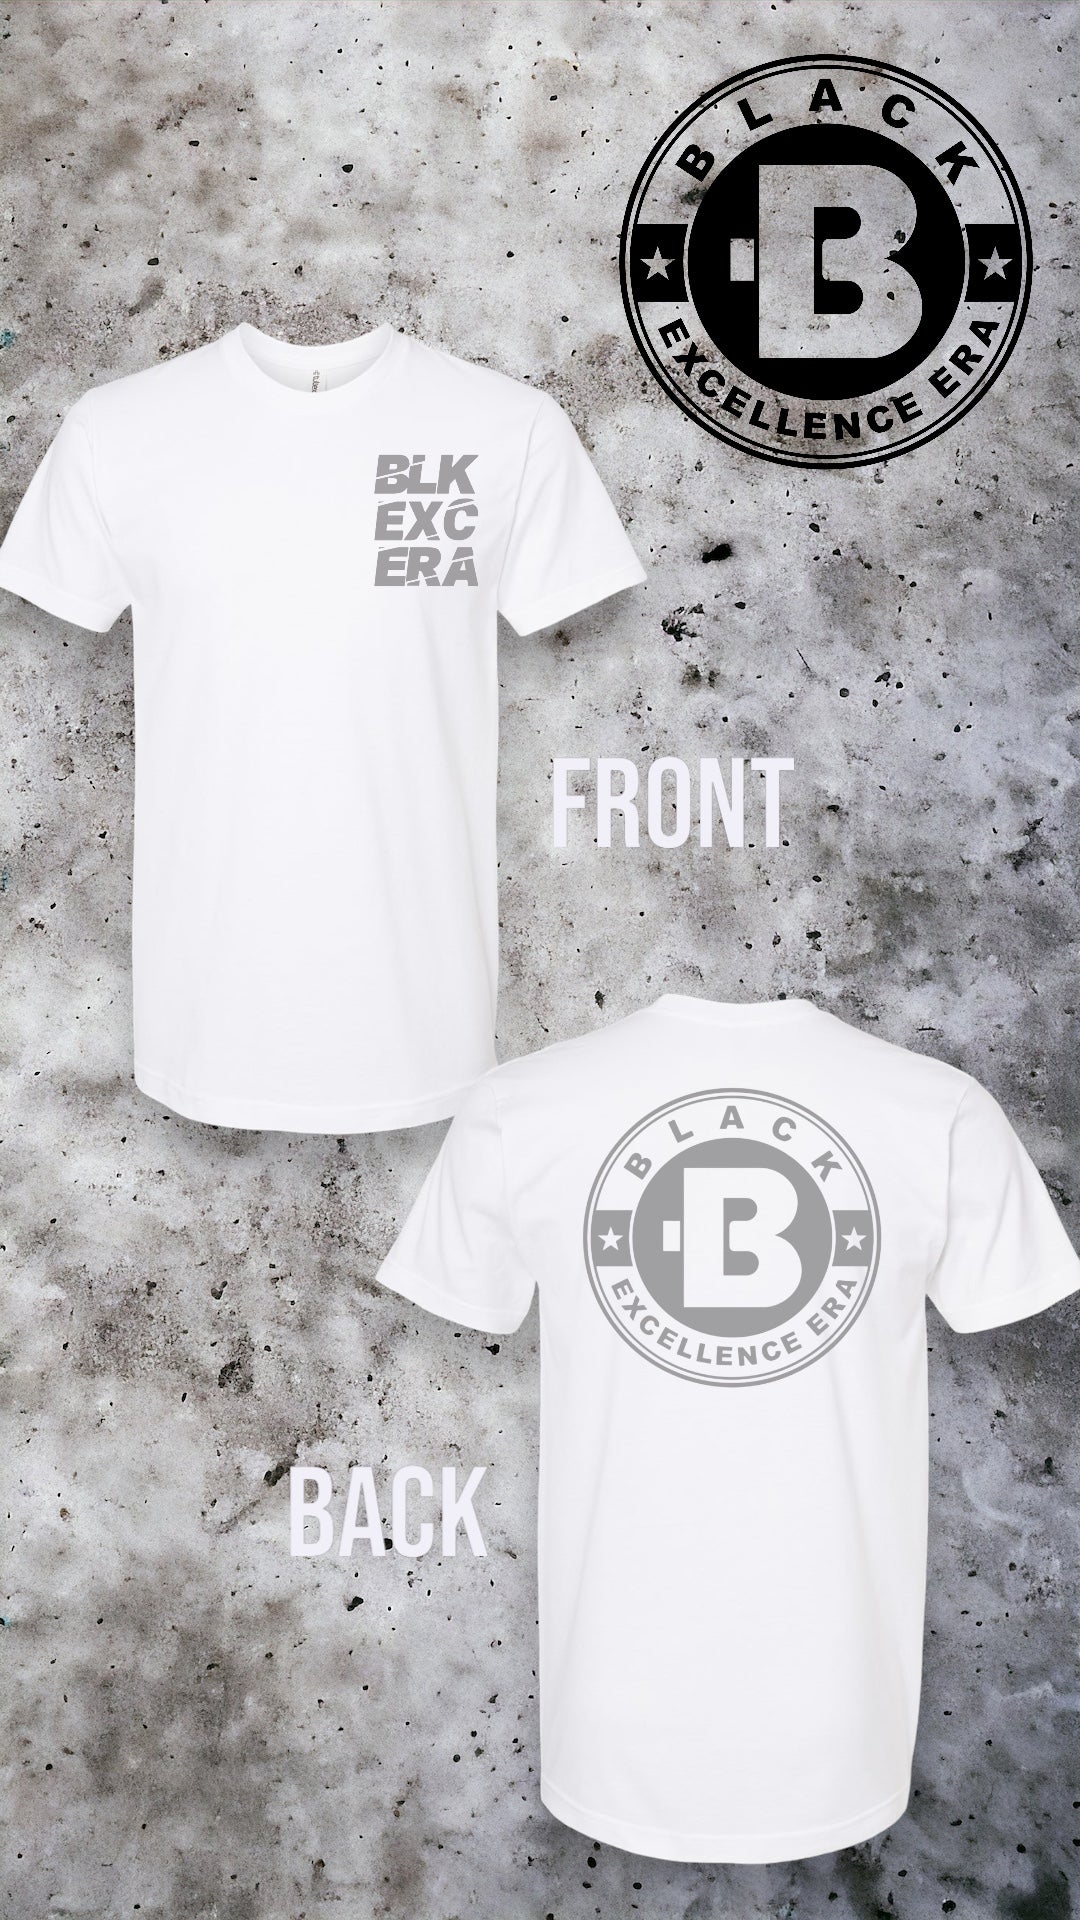 Black Excellence Payback T Shirt